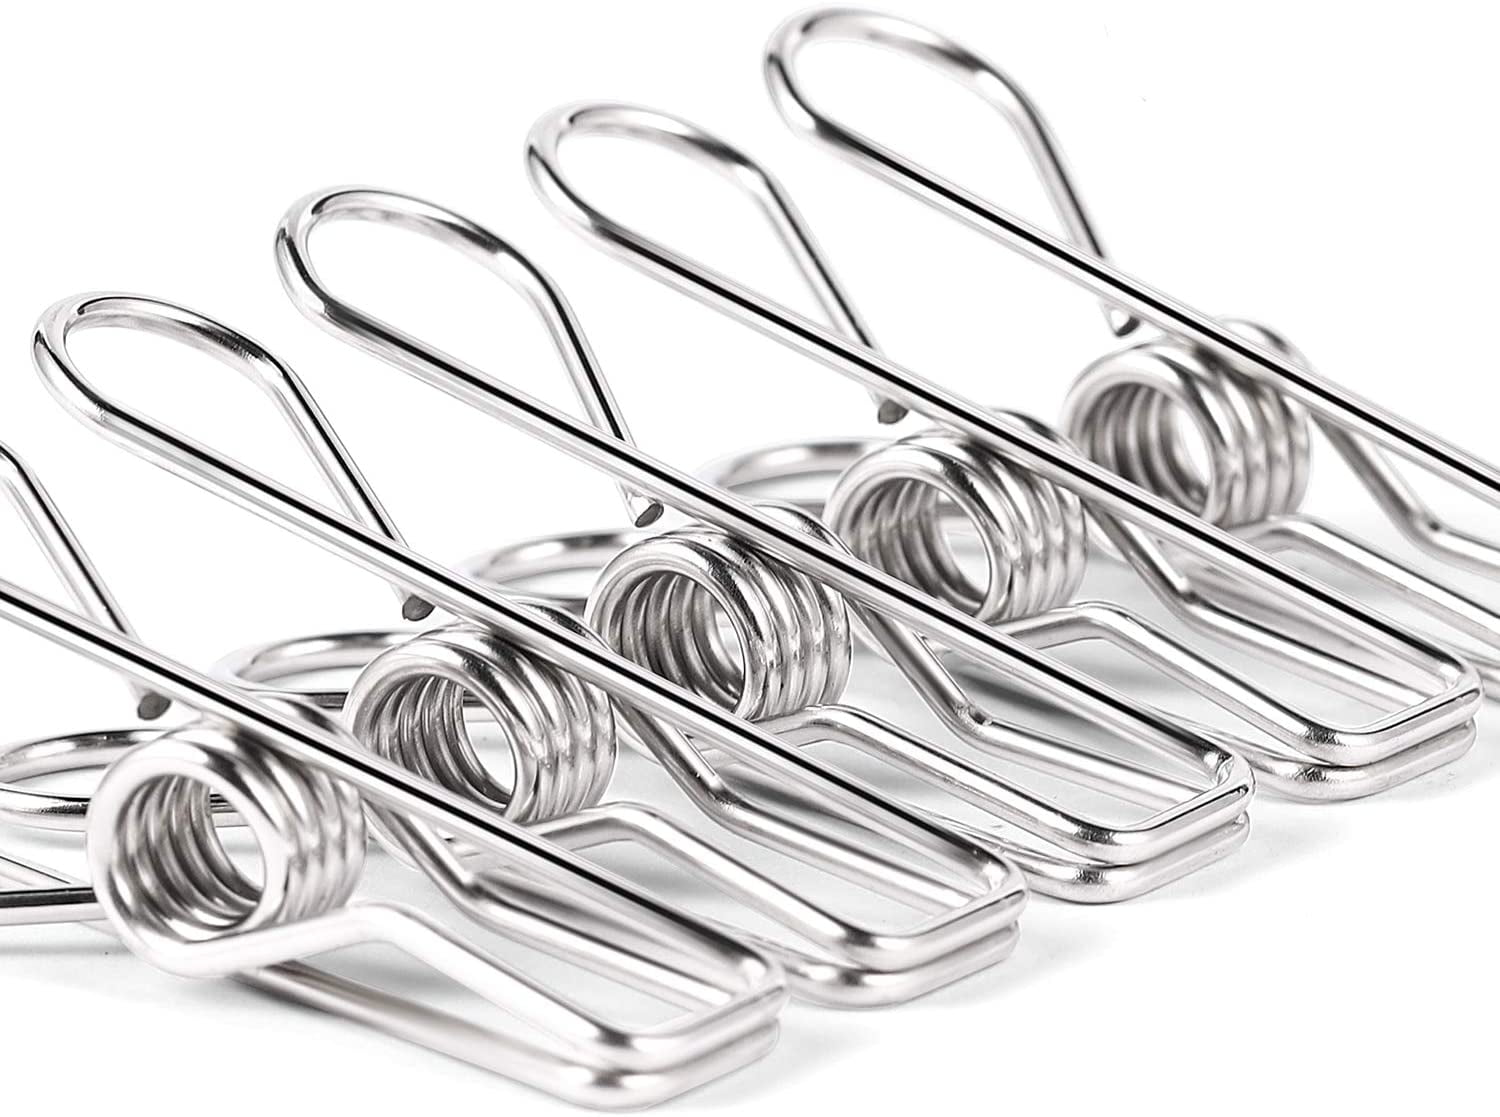 Stainless Steel Wire Laundry Clip 3.3" Multi-purpose Outdoor Indoor Clothespins 